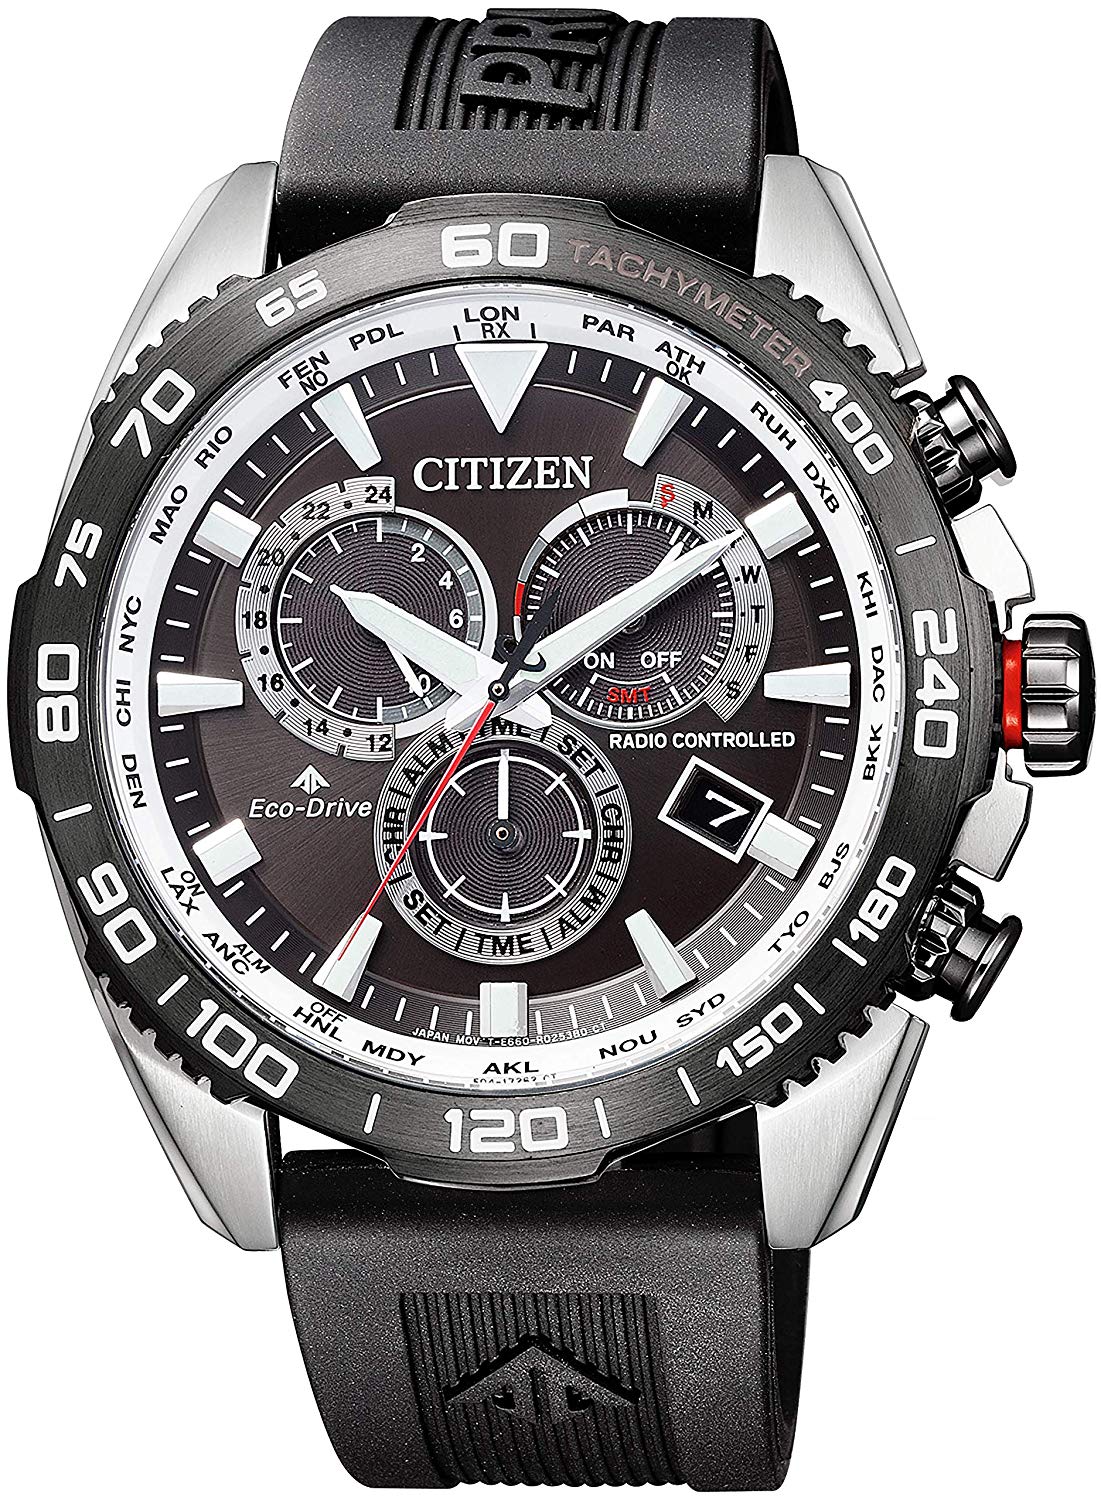 Citizens Eco Drive Watch Manual